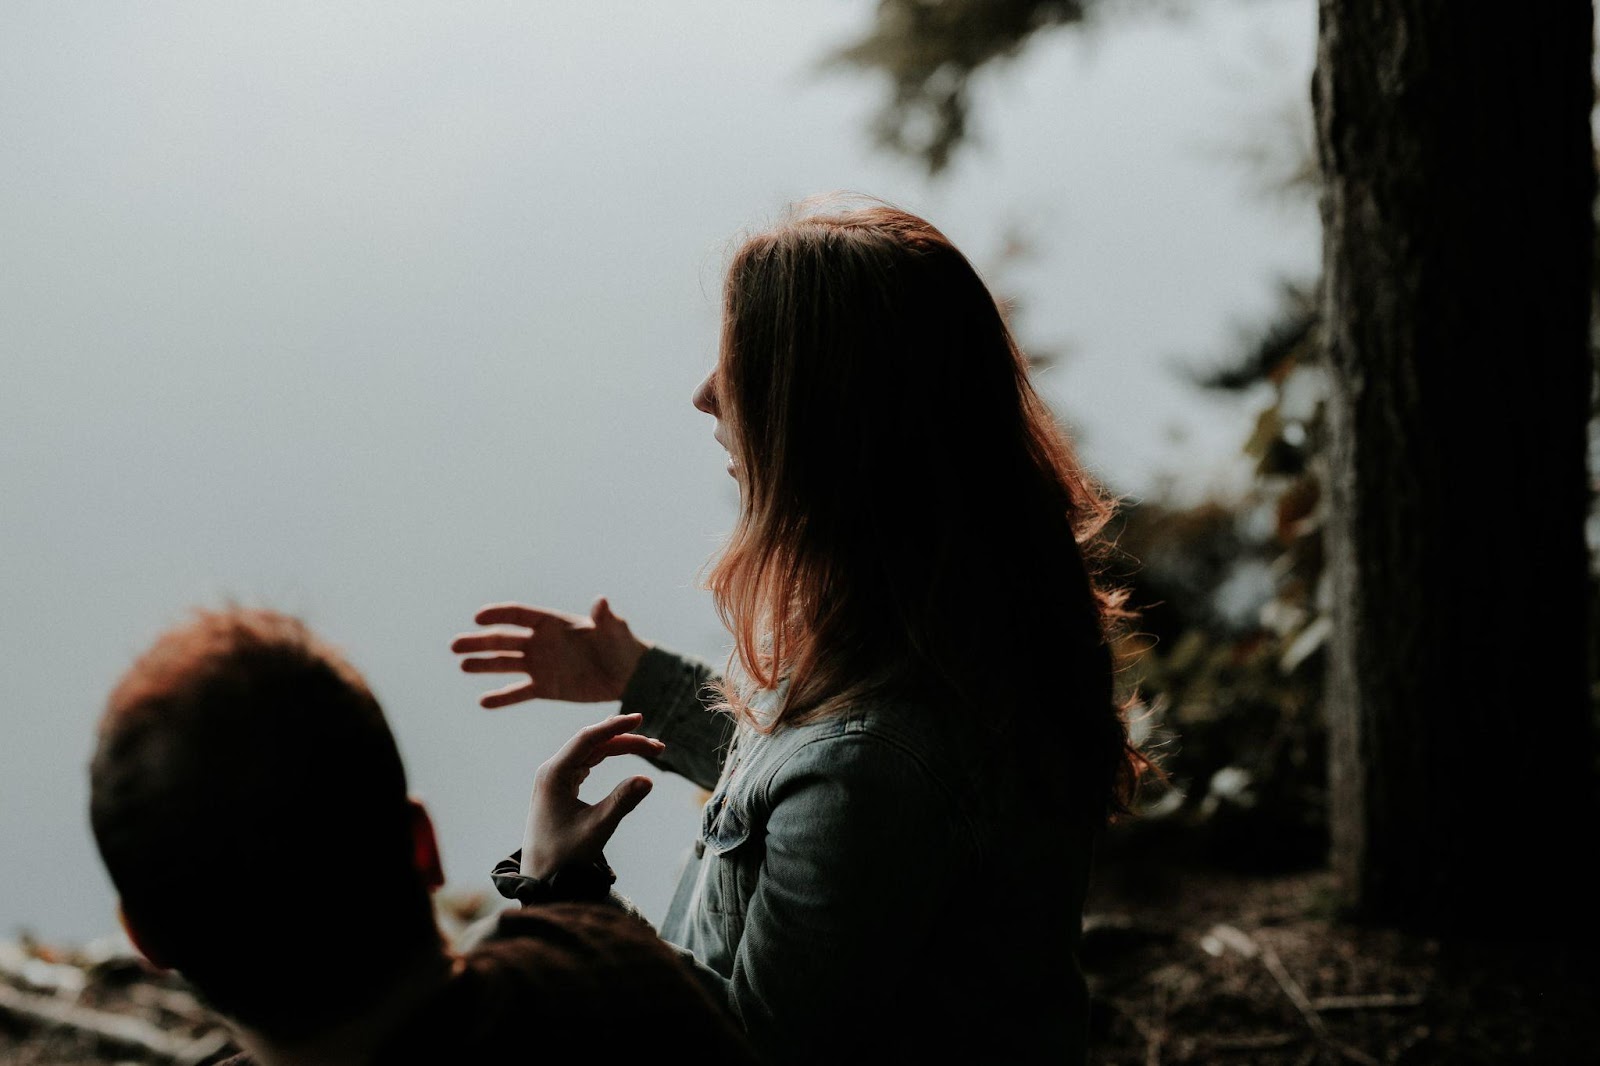 Two People in a Forrest and a Woman Looking Like She's Talking